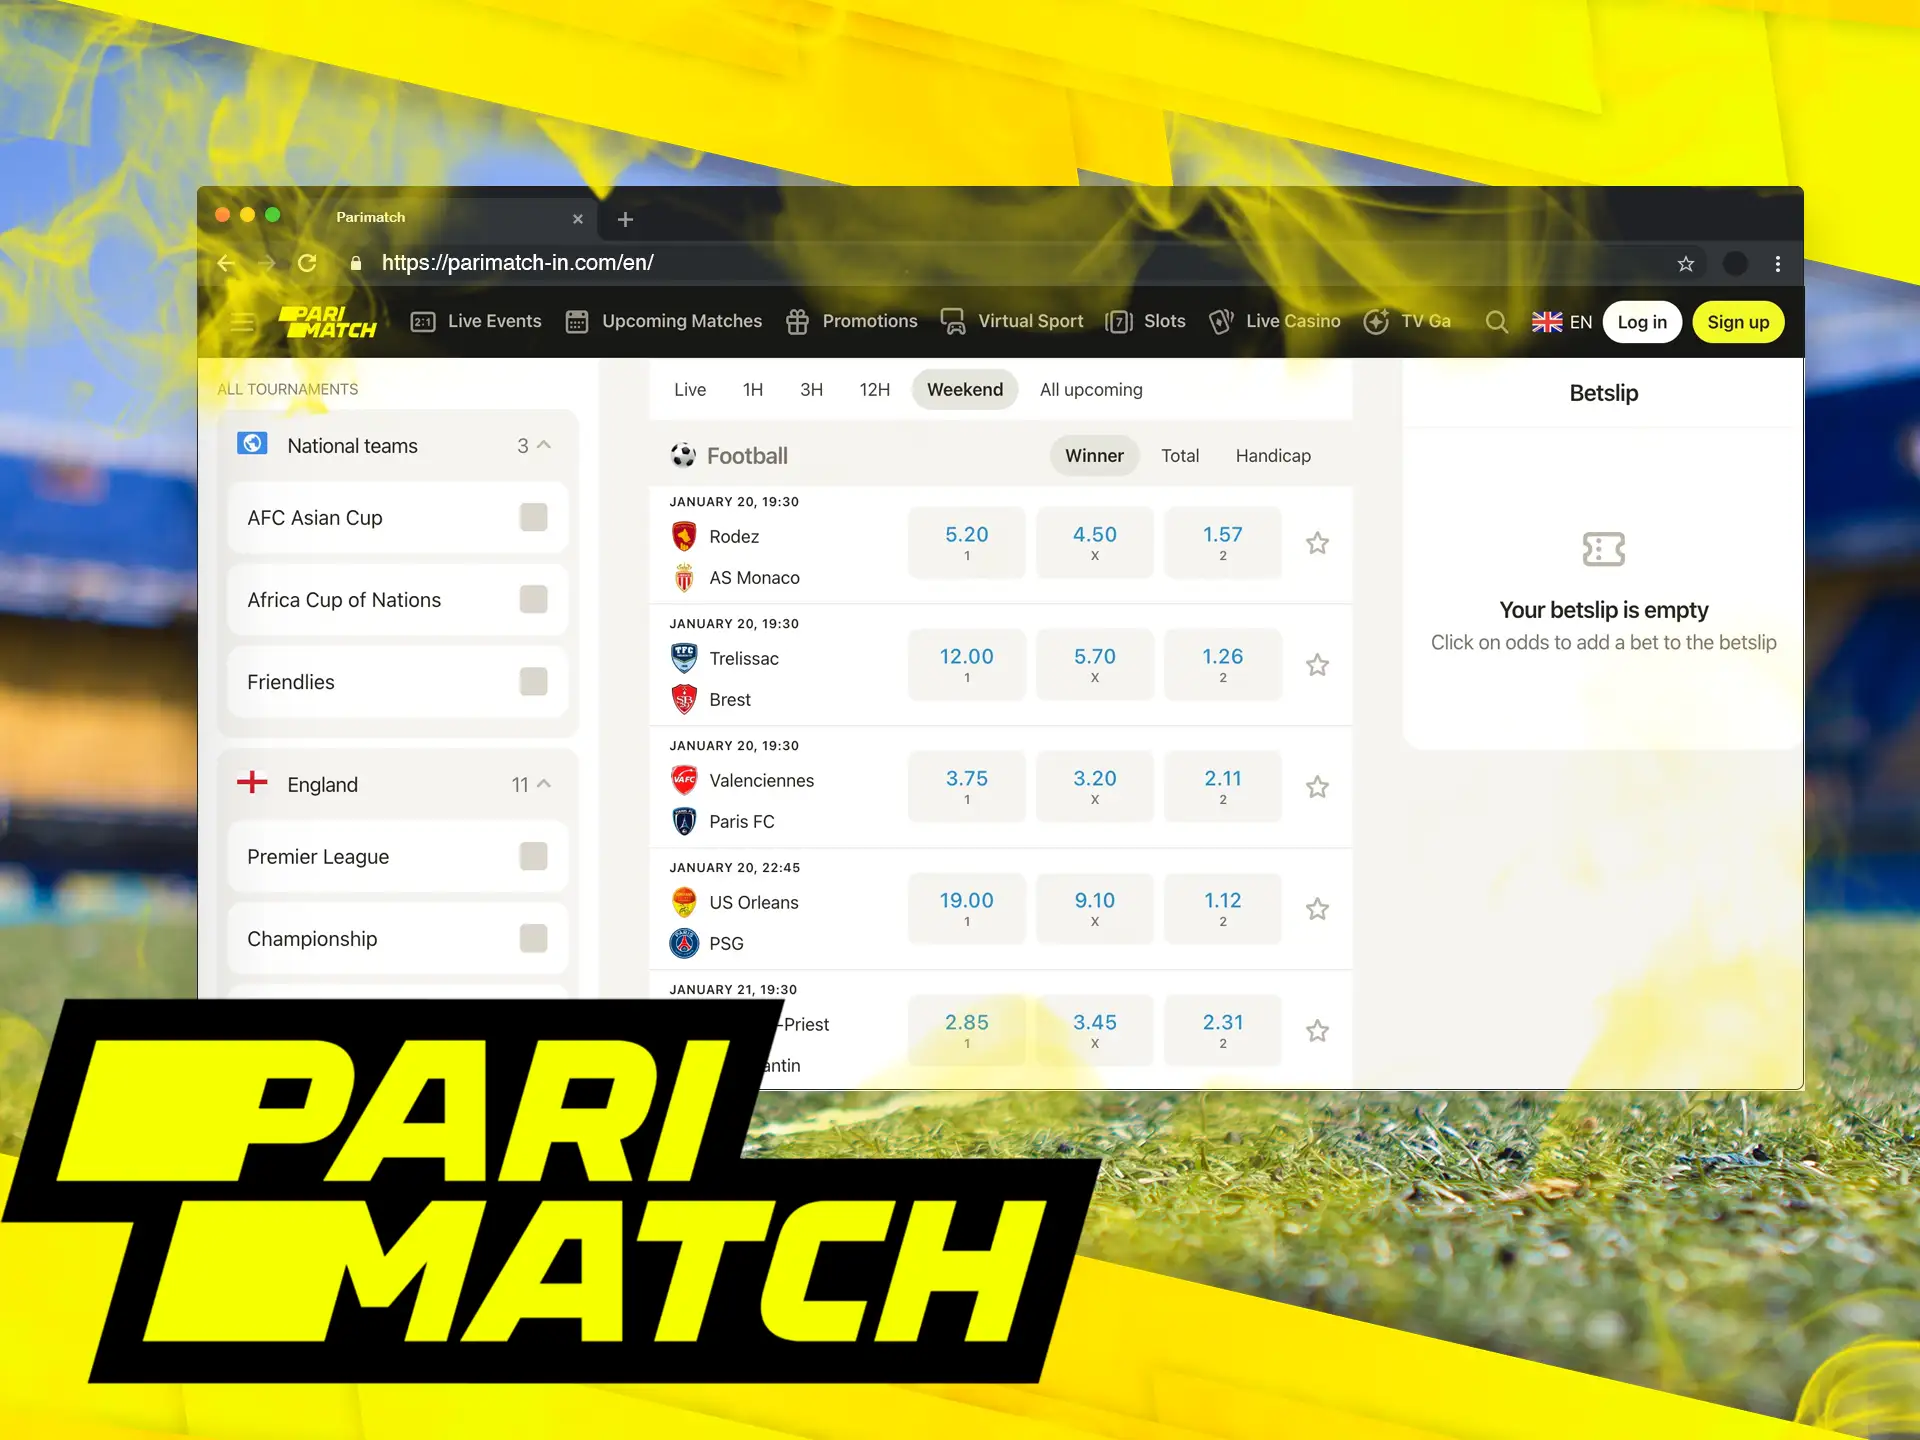 Enjoy live event broadcasts directly on the Parimatch website while placing bets during the match.